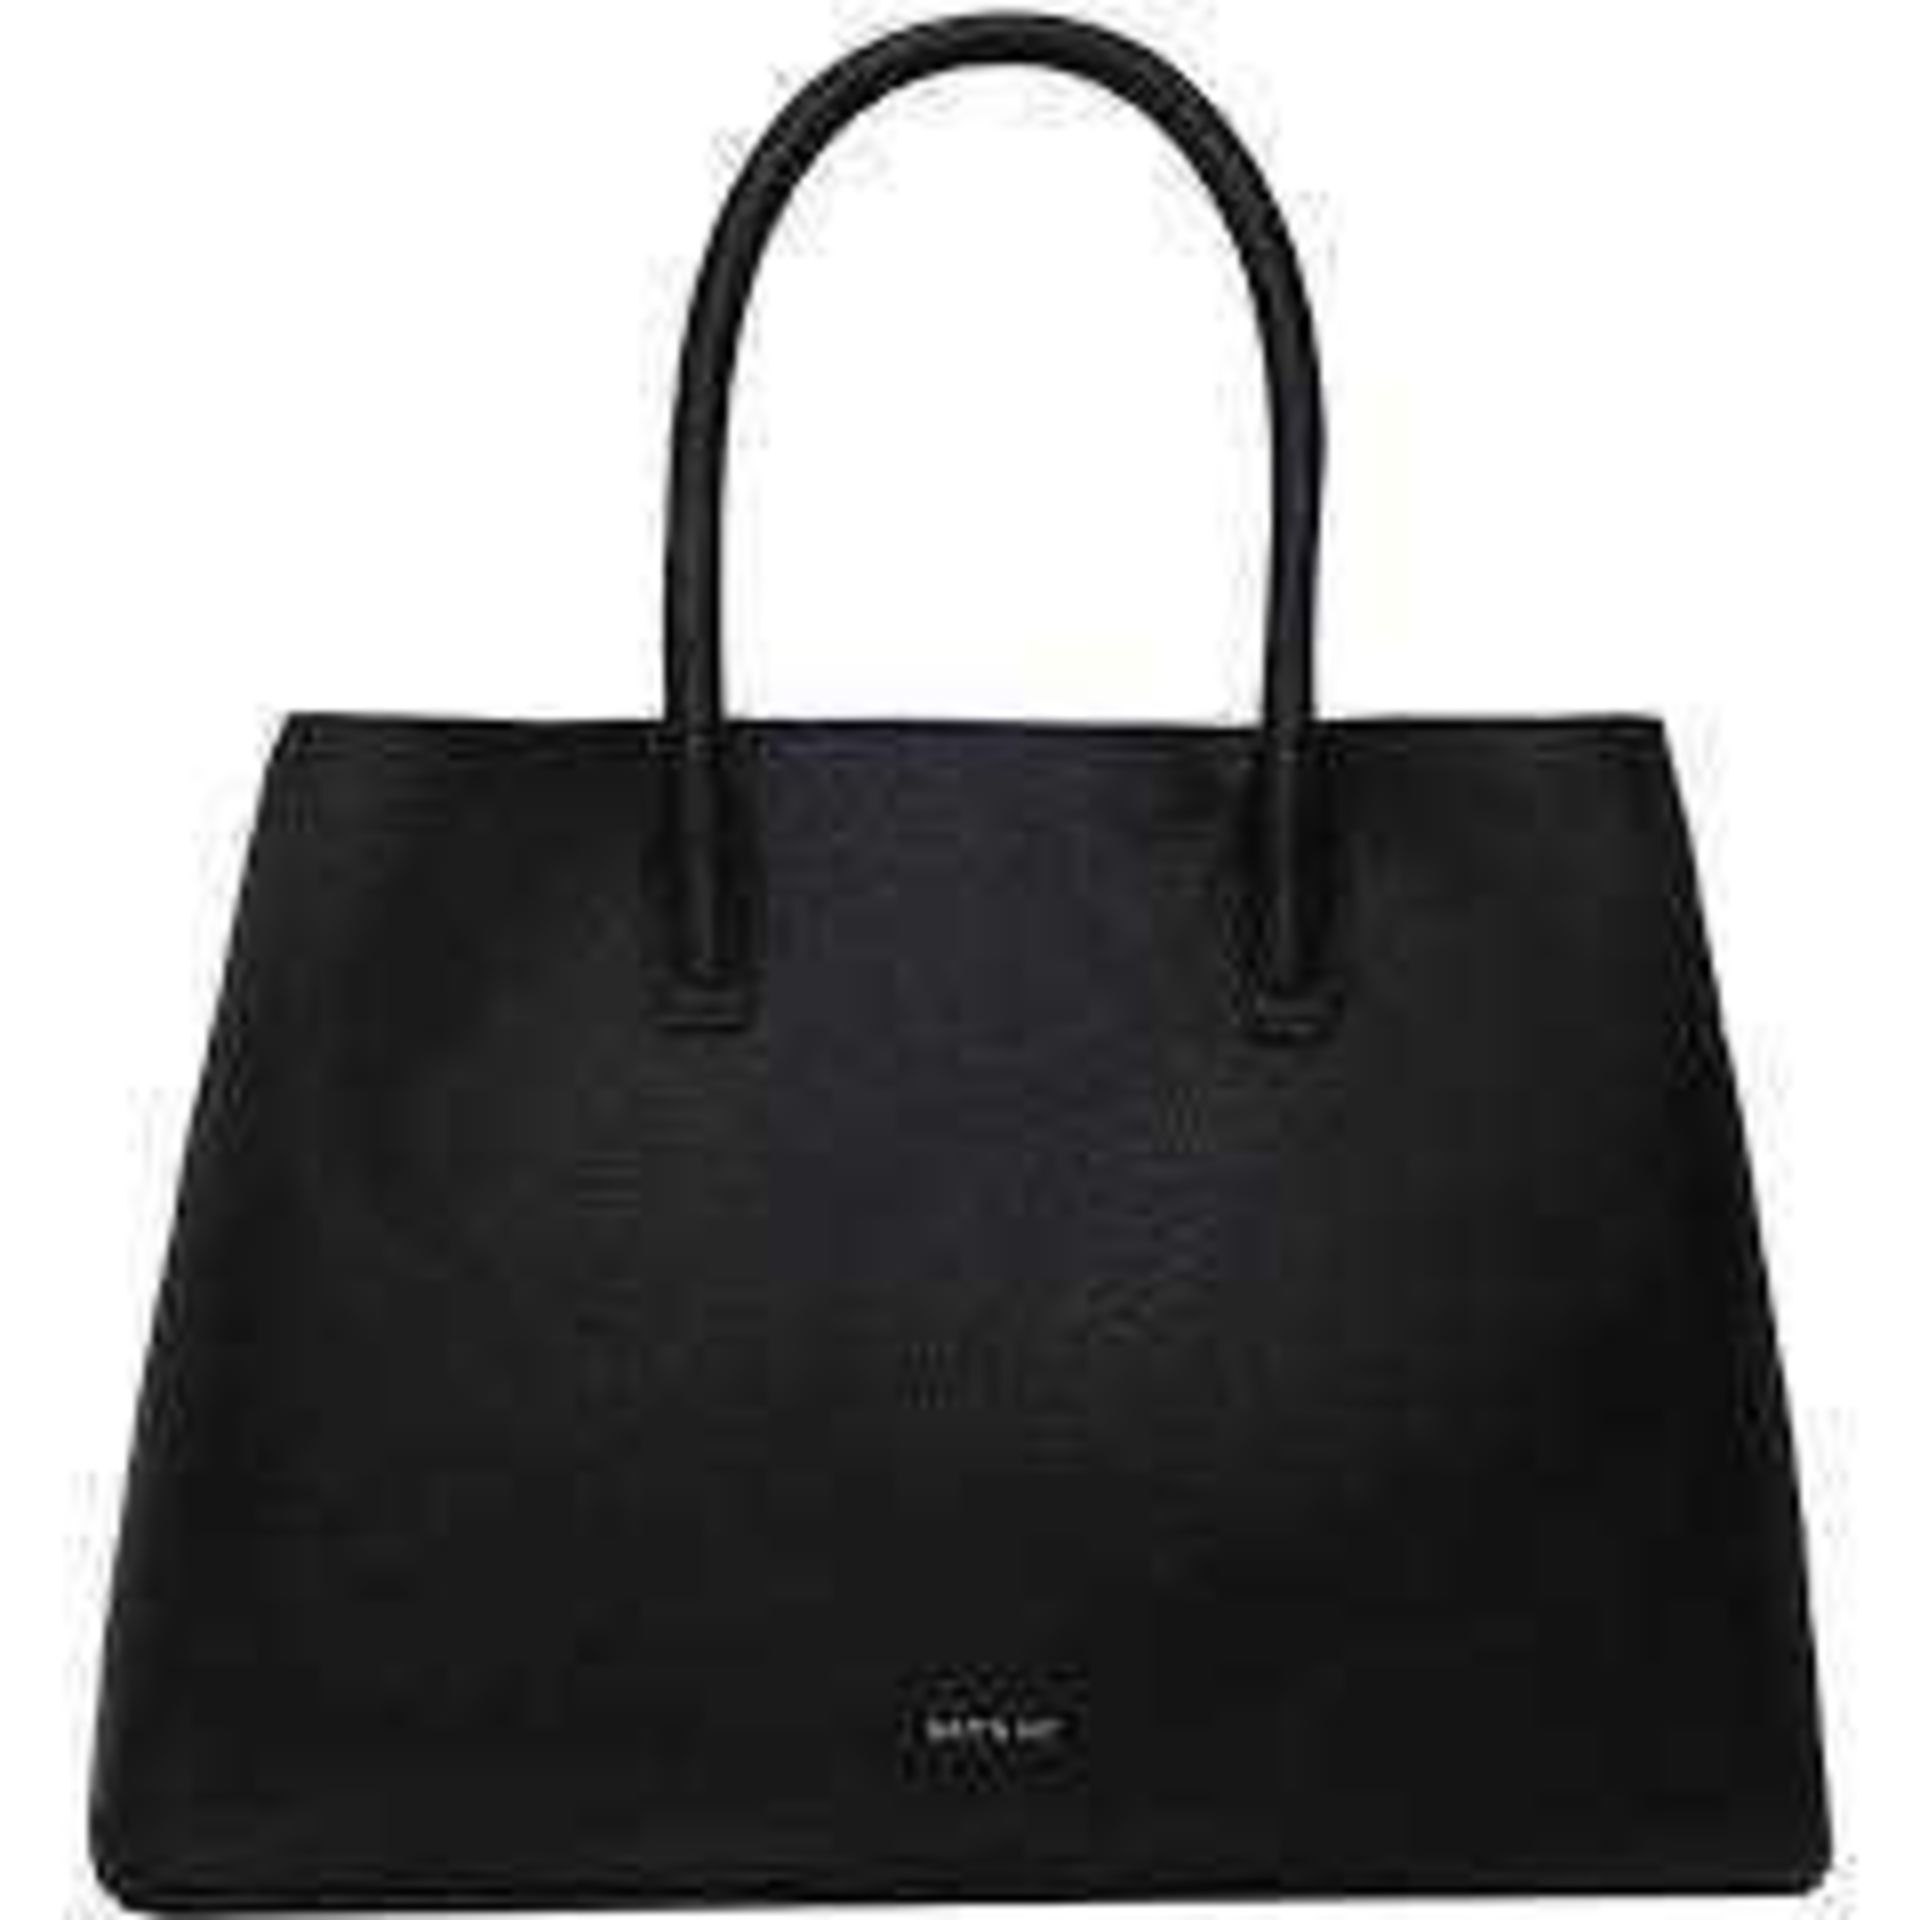 (Jb) RRP £130 Lot To Contain 1 Bagged Matt & Nat Recycled Purity Collection Krista Handbag In Black